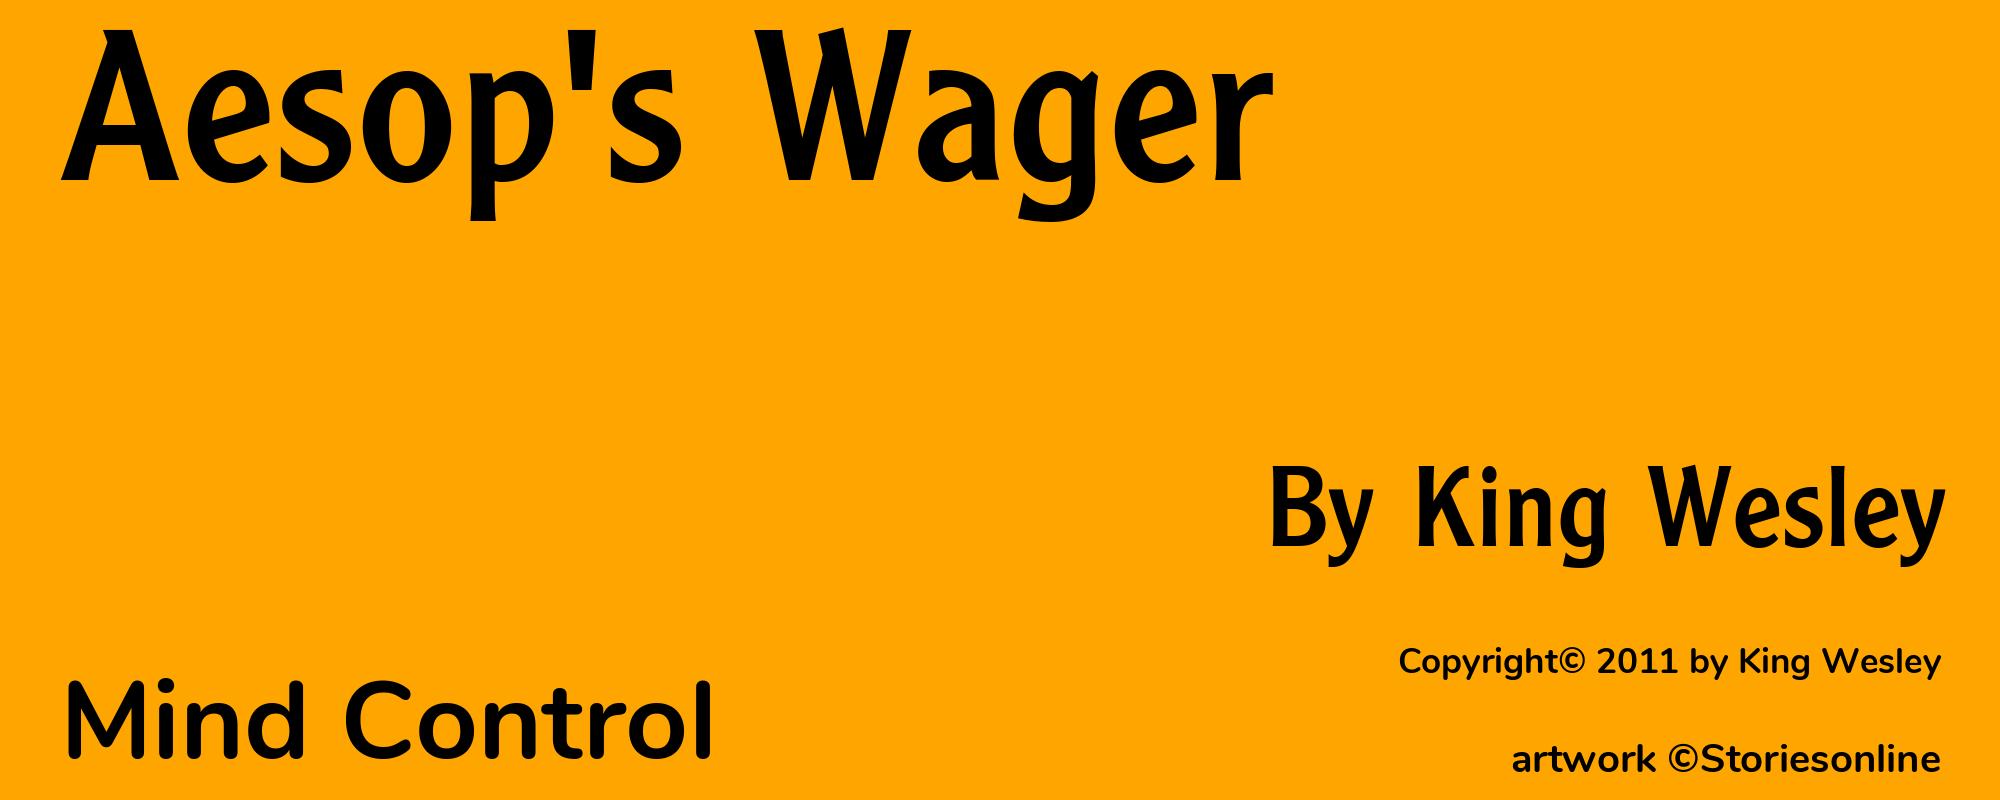 Aesop's Wager - Cover